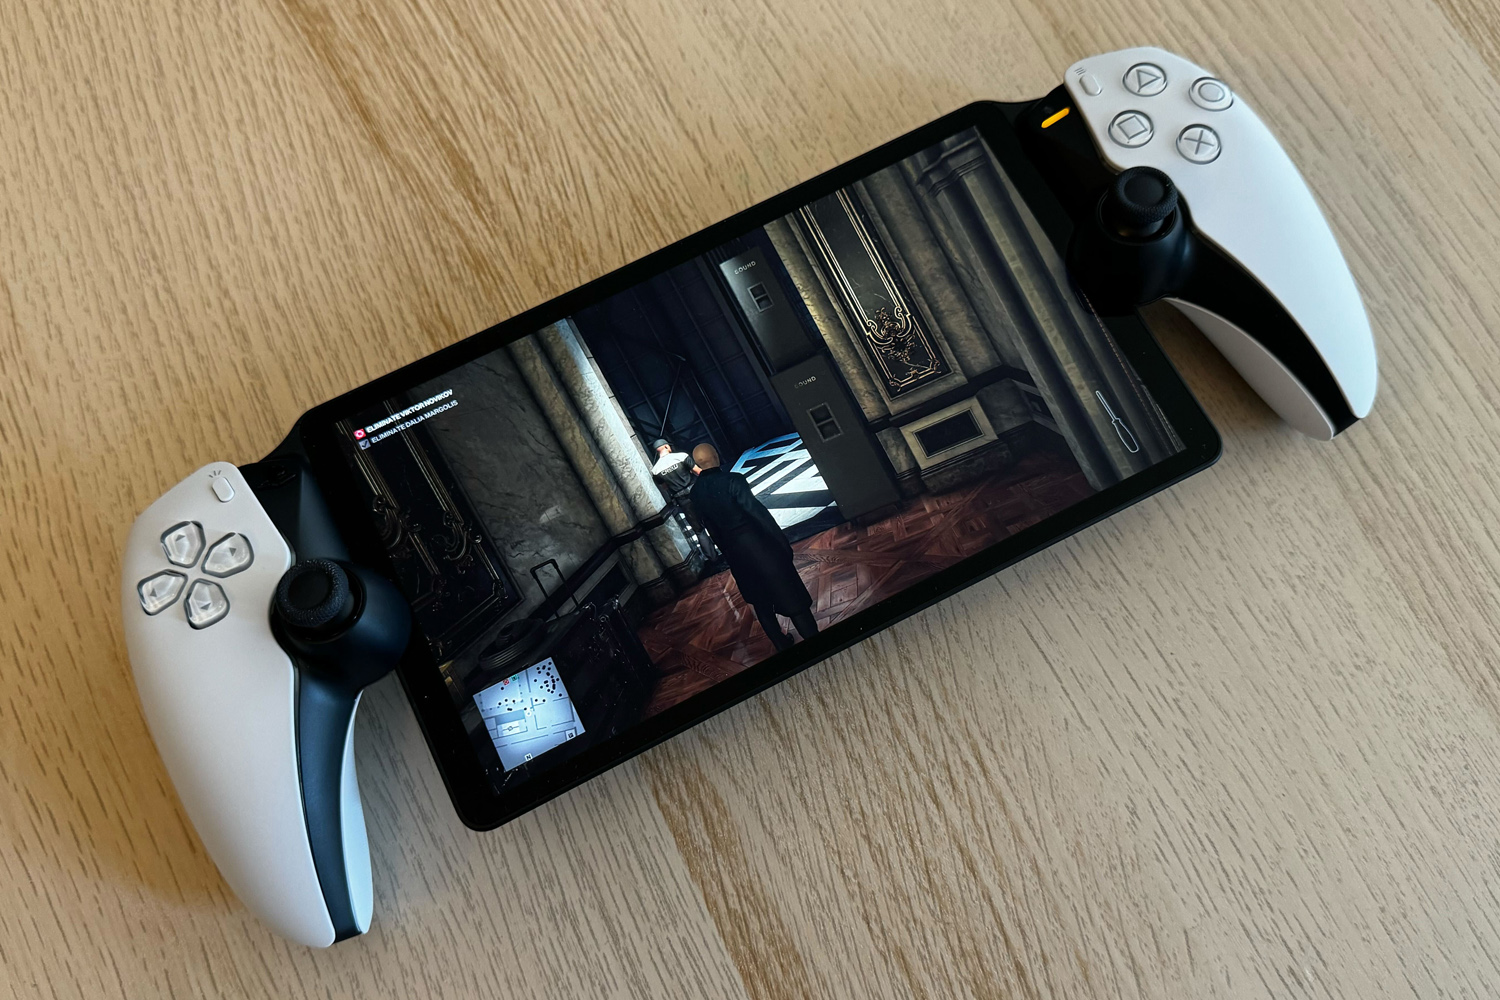 PlayStation Portal review: I have a stream for handheld PS5 games